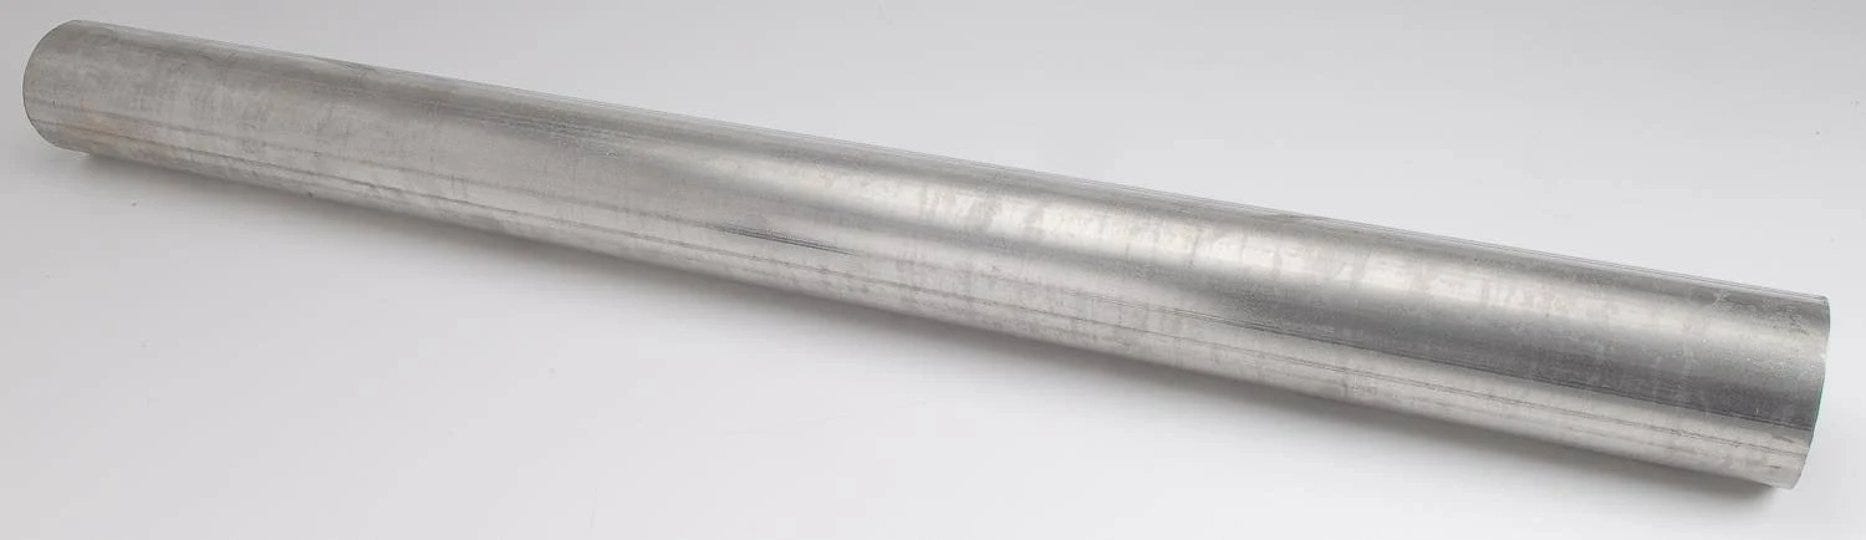 jegs-30613-aluminized-exhaust-tubing-1